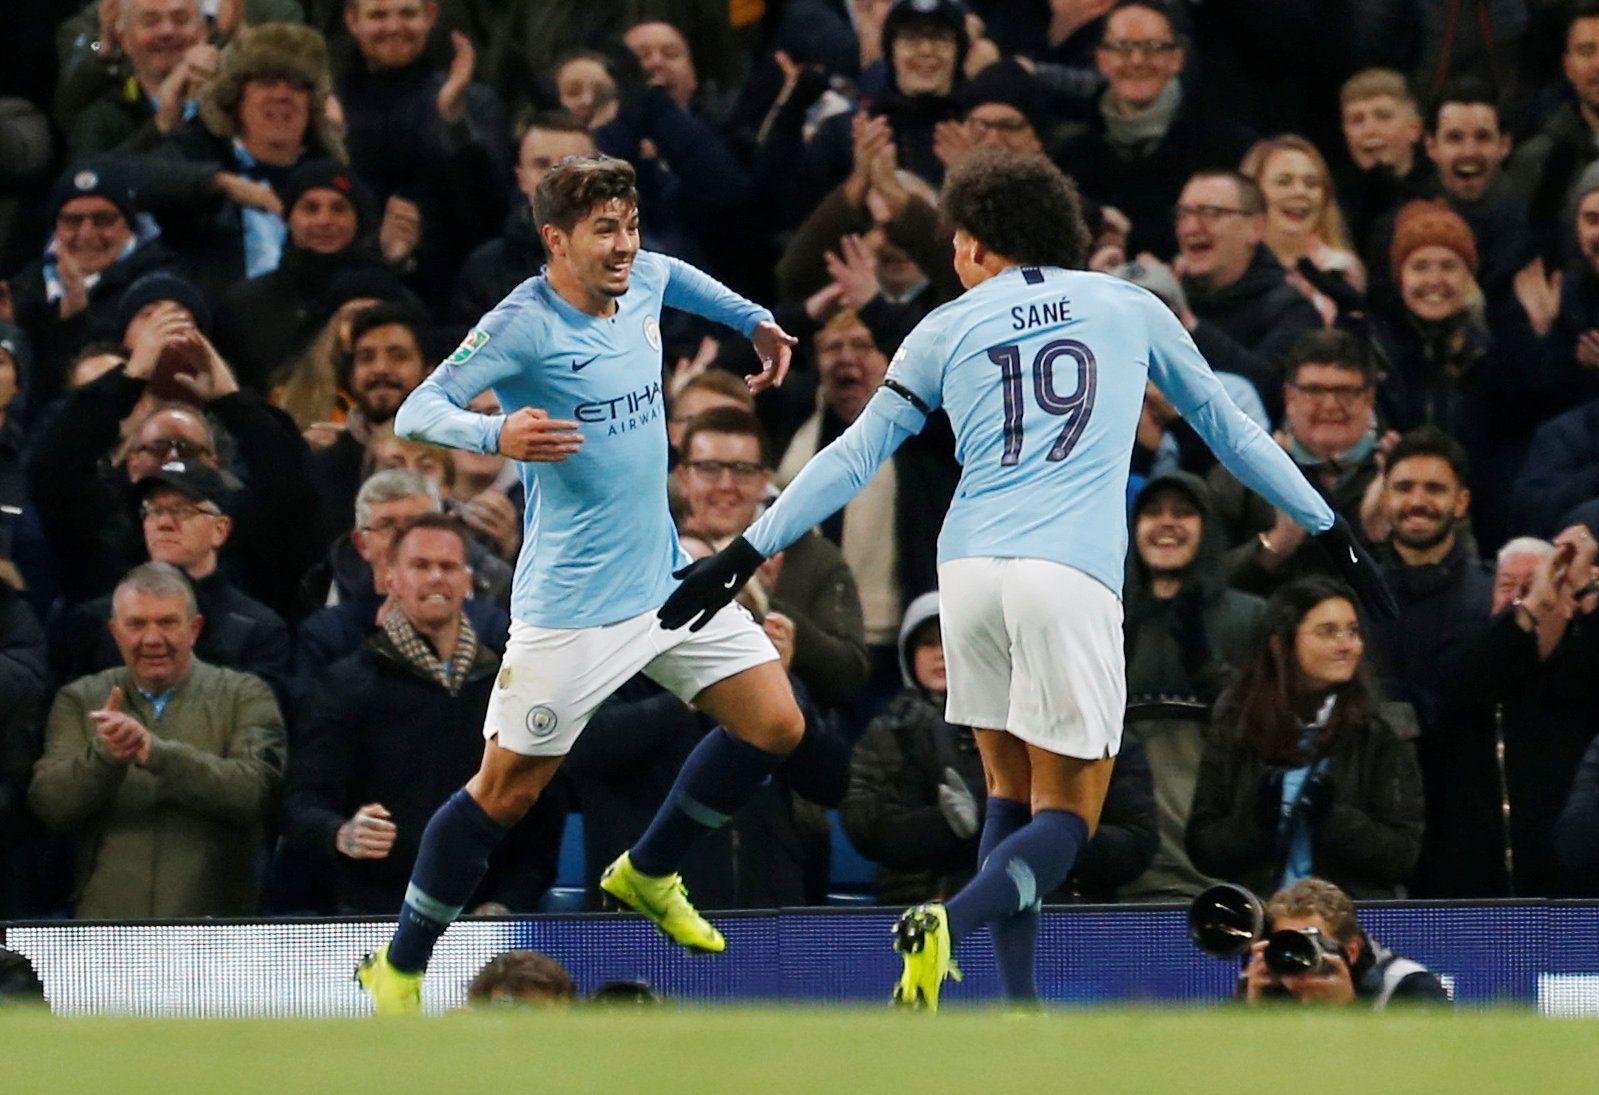 Soccer Football - Carabao Cup Fourth Round - Manchester City v Fulham - Etihad Stadium, Manchester, Britain - November 1, 2018  Manchester City's Brahim Diaz celebrates scoring their first goal with Leroy Sane        Action Images via Reuters/Craig Brough